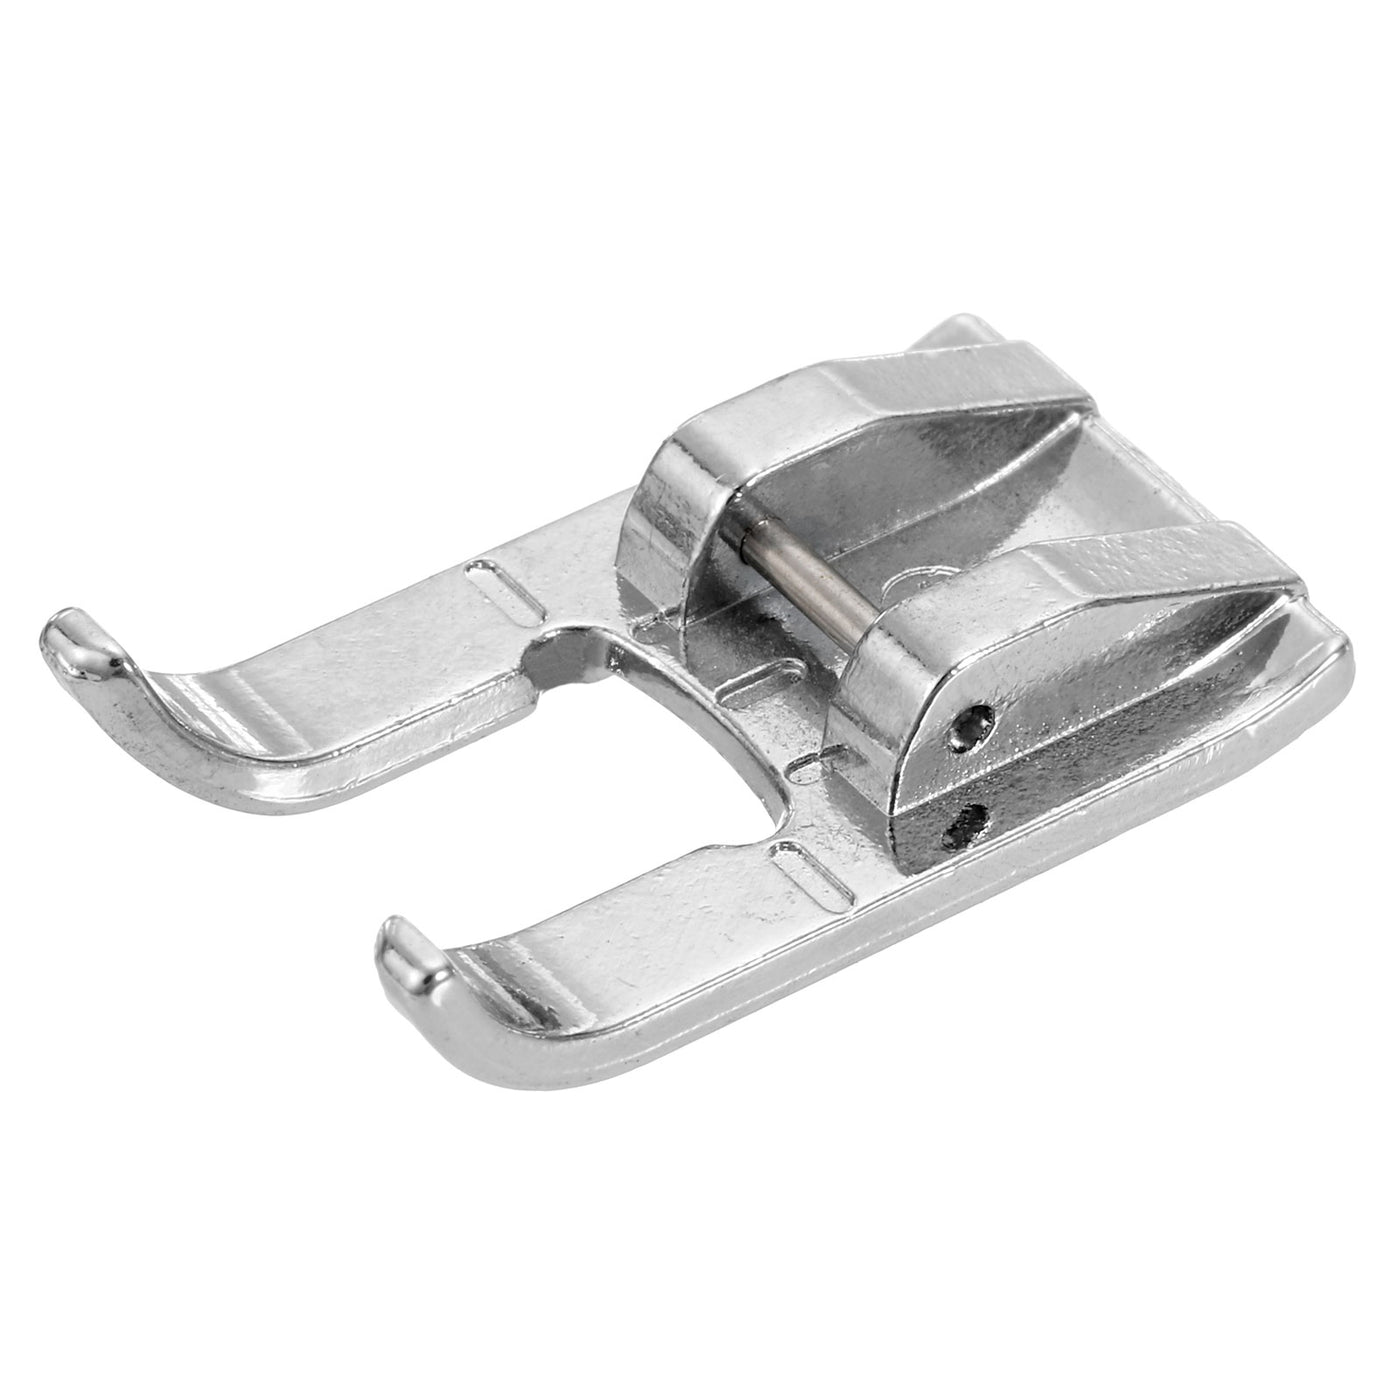 uxcell Uxcell Open Toe Foot Sewing Machine Foot Galvanized Iron Presser Foot 32x18mm